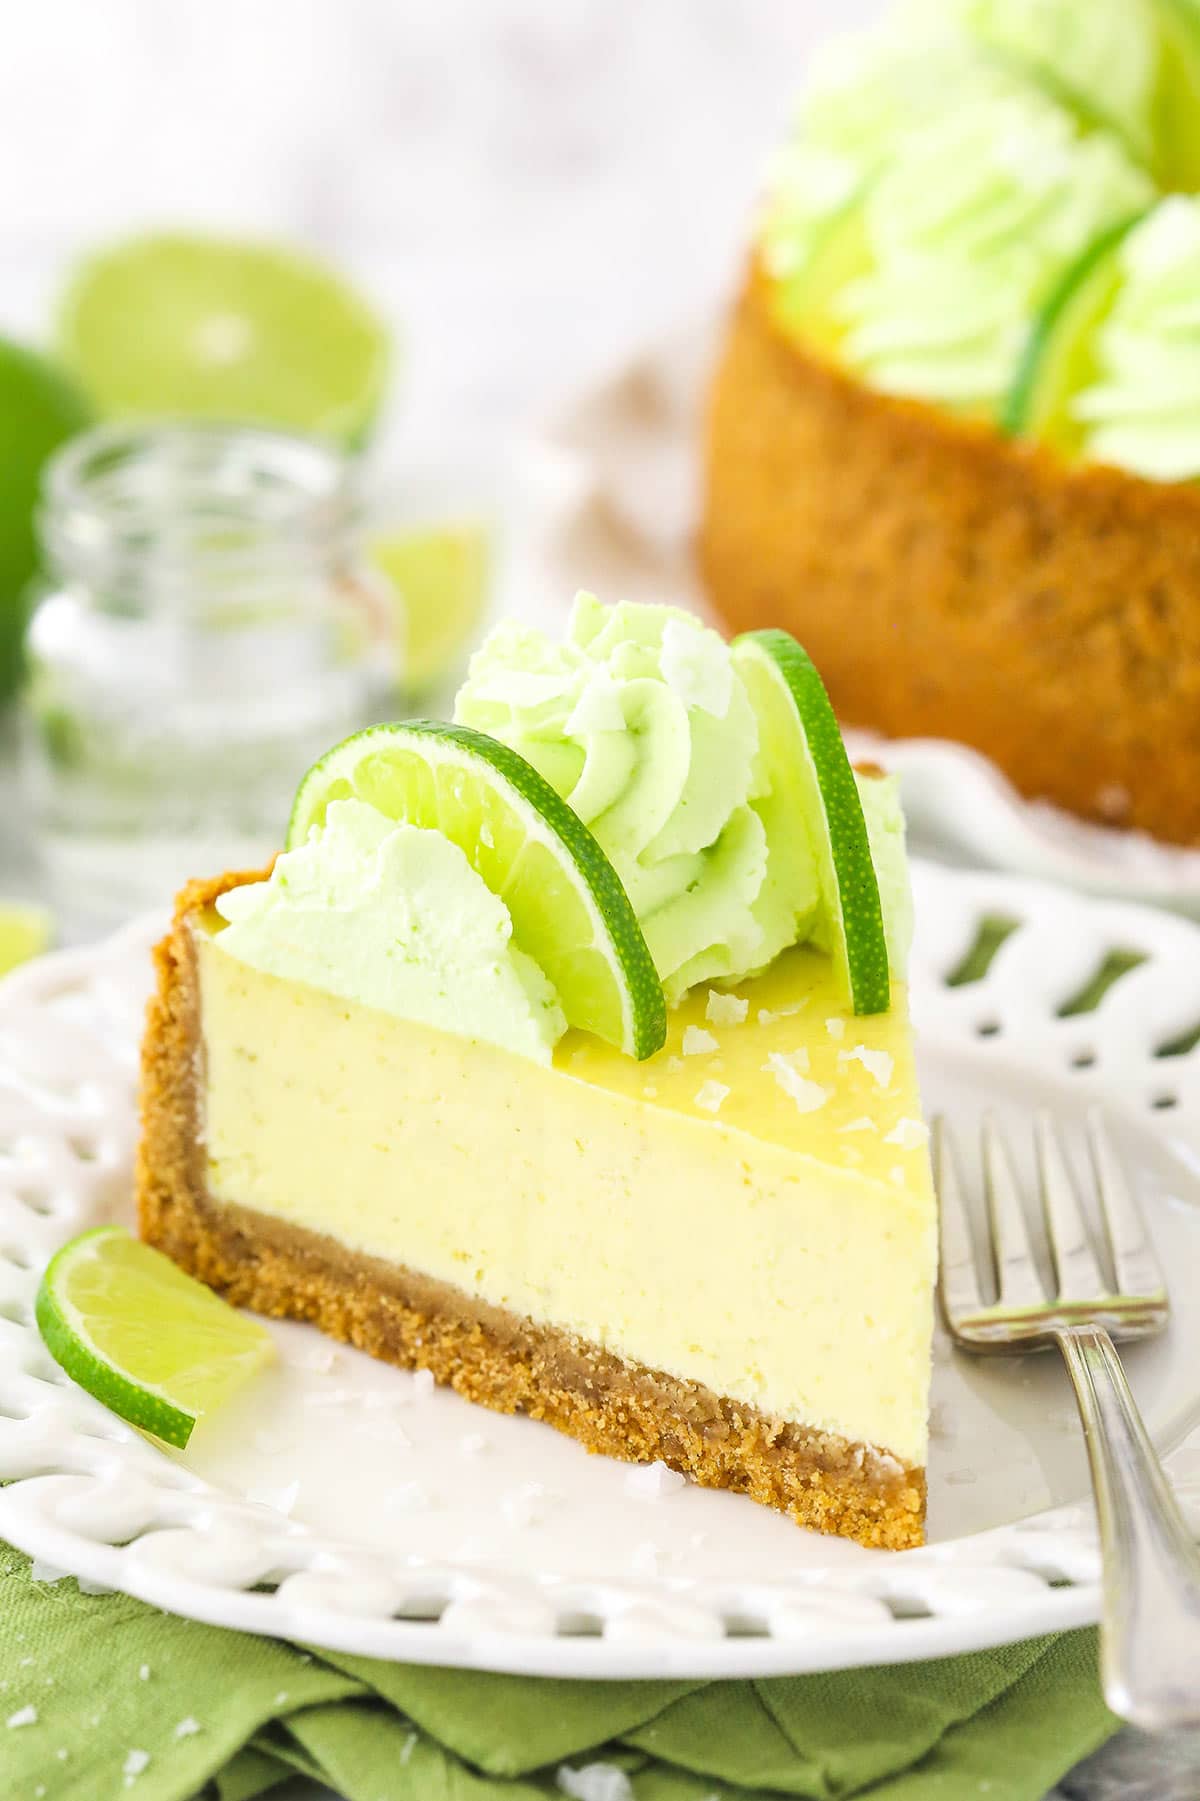 A slice of margarita cheesecake on a plate with the rest of the cheesecake on a cake stand behind it